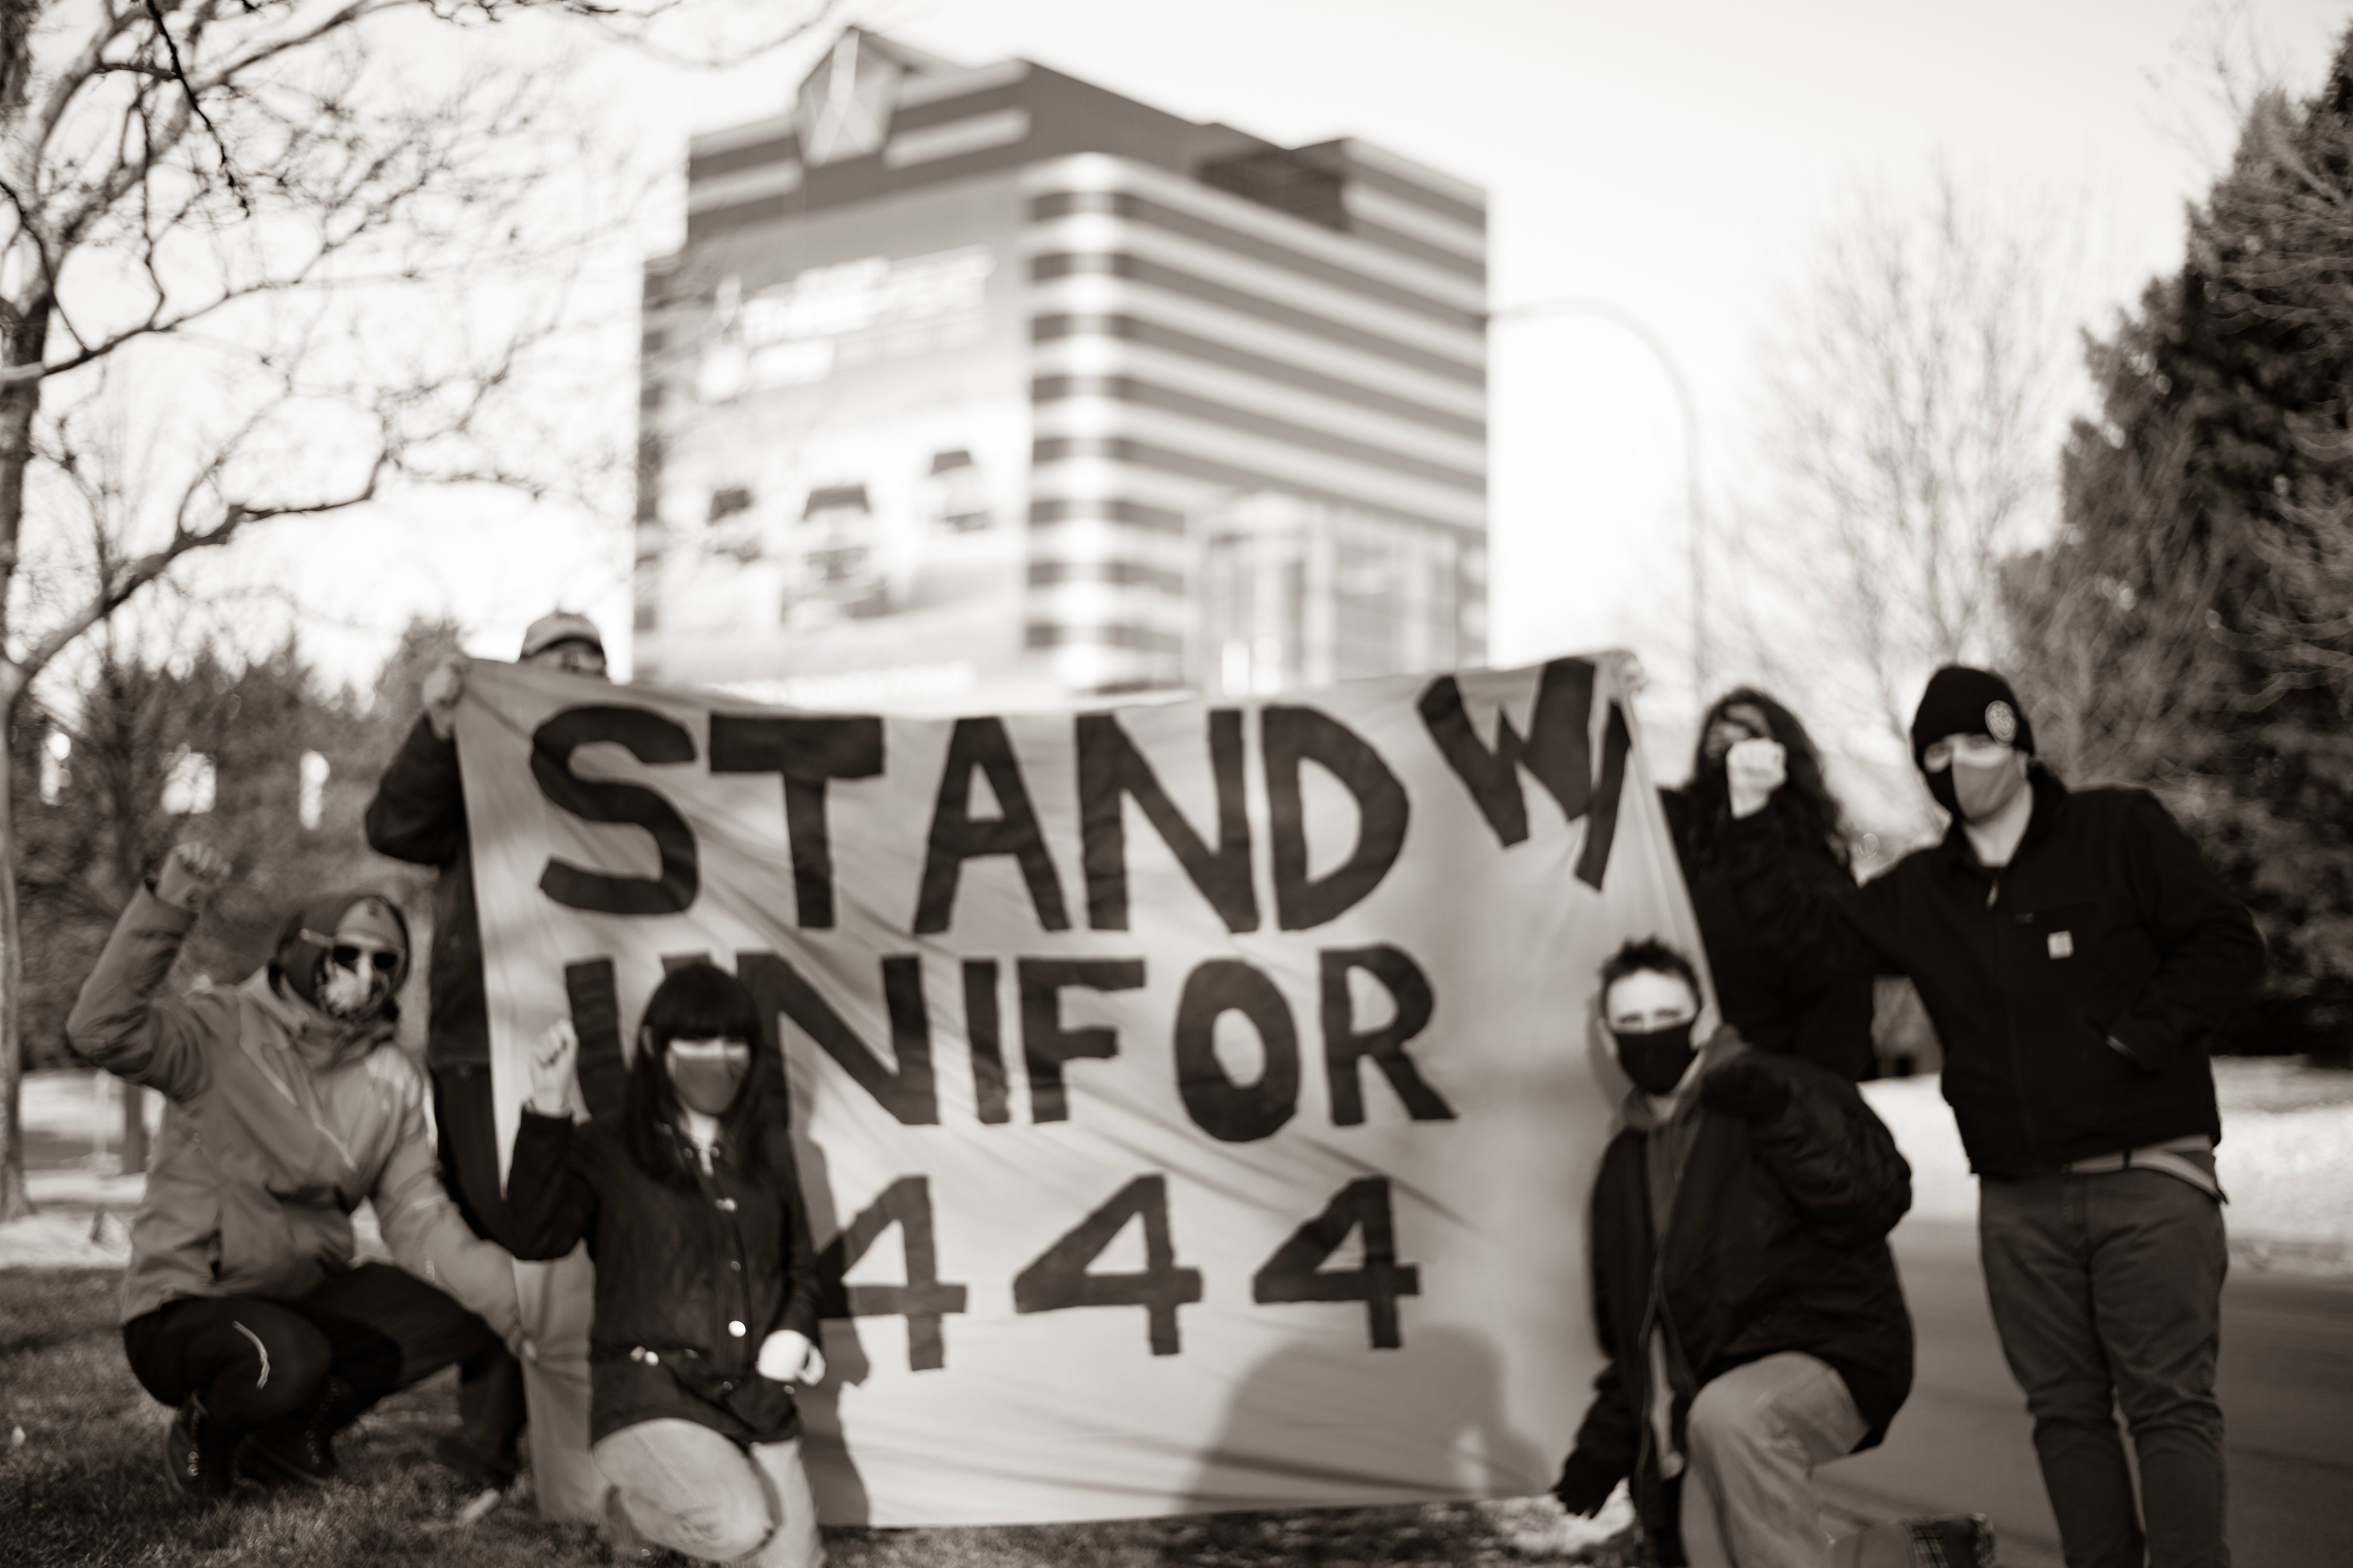 Six IWW Detroit Members stand with a banner which reads "Stand With Unifor 444."